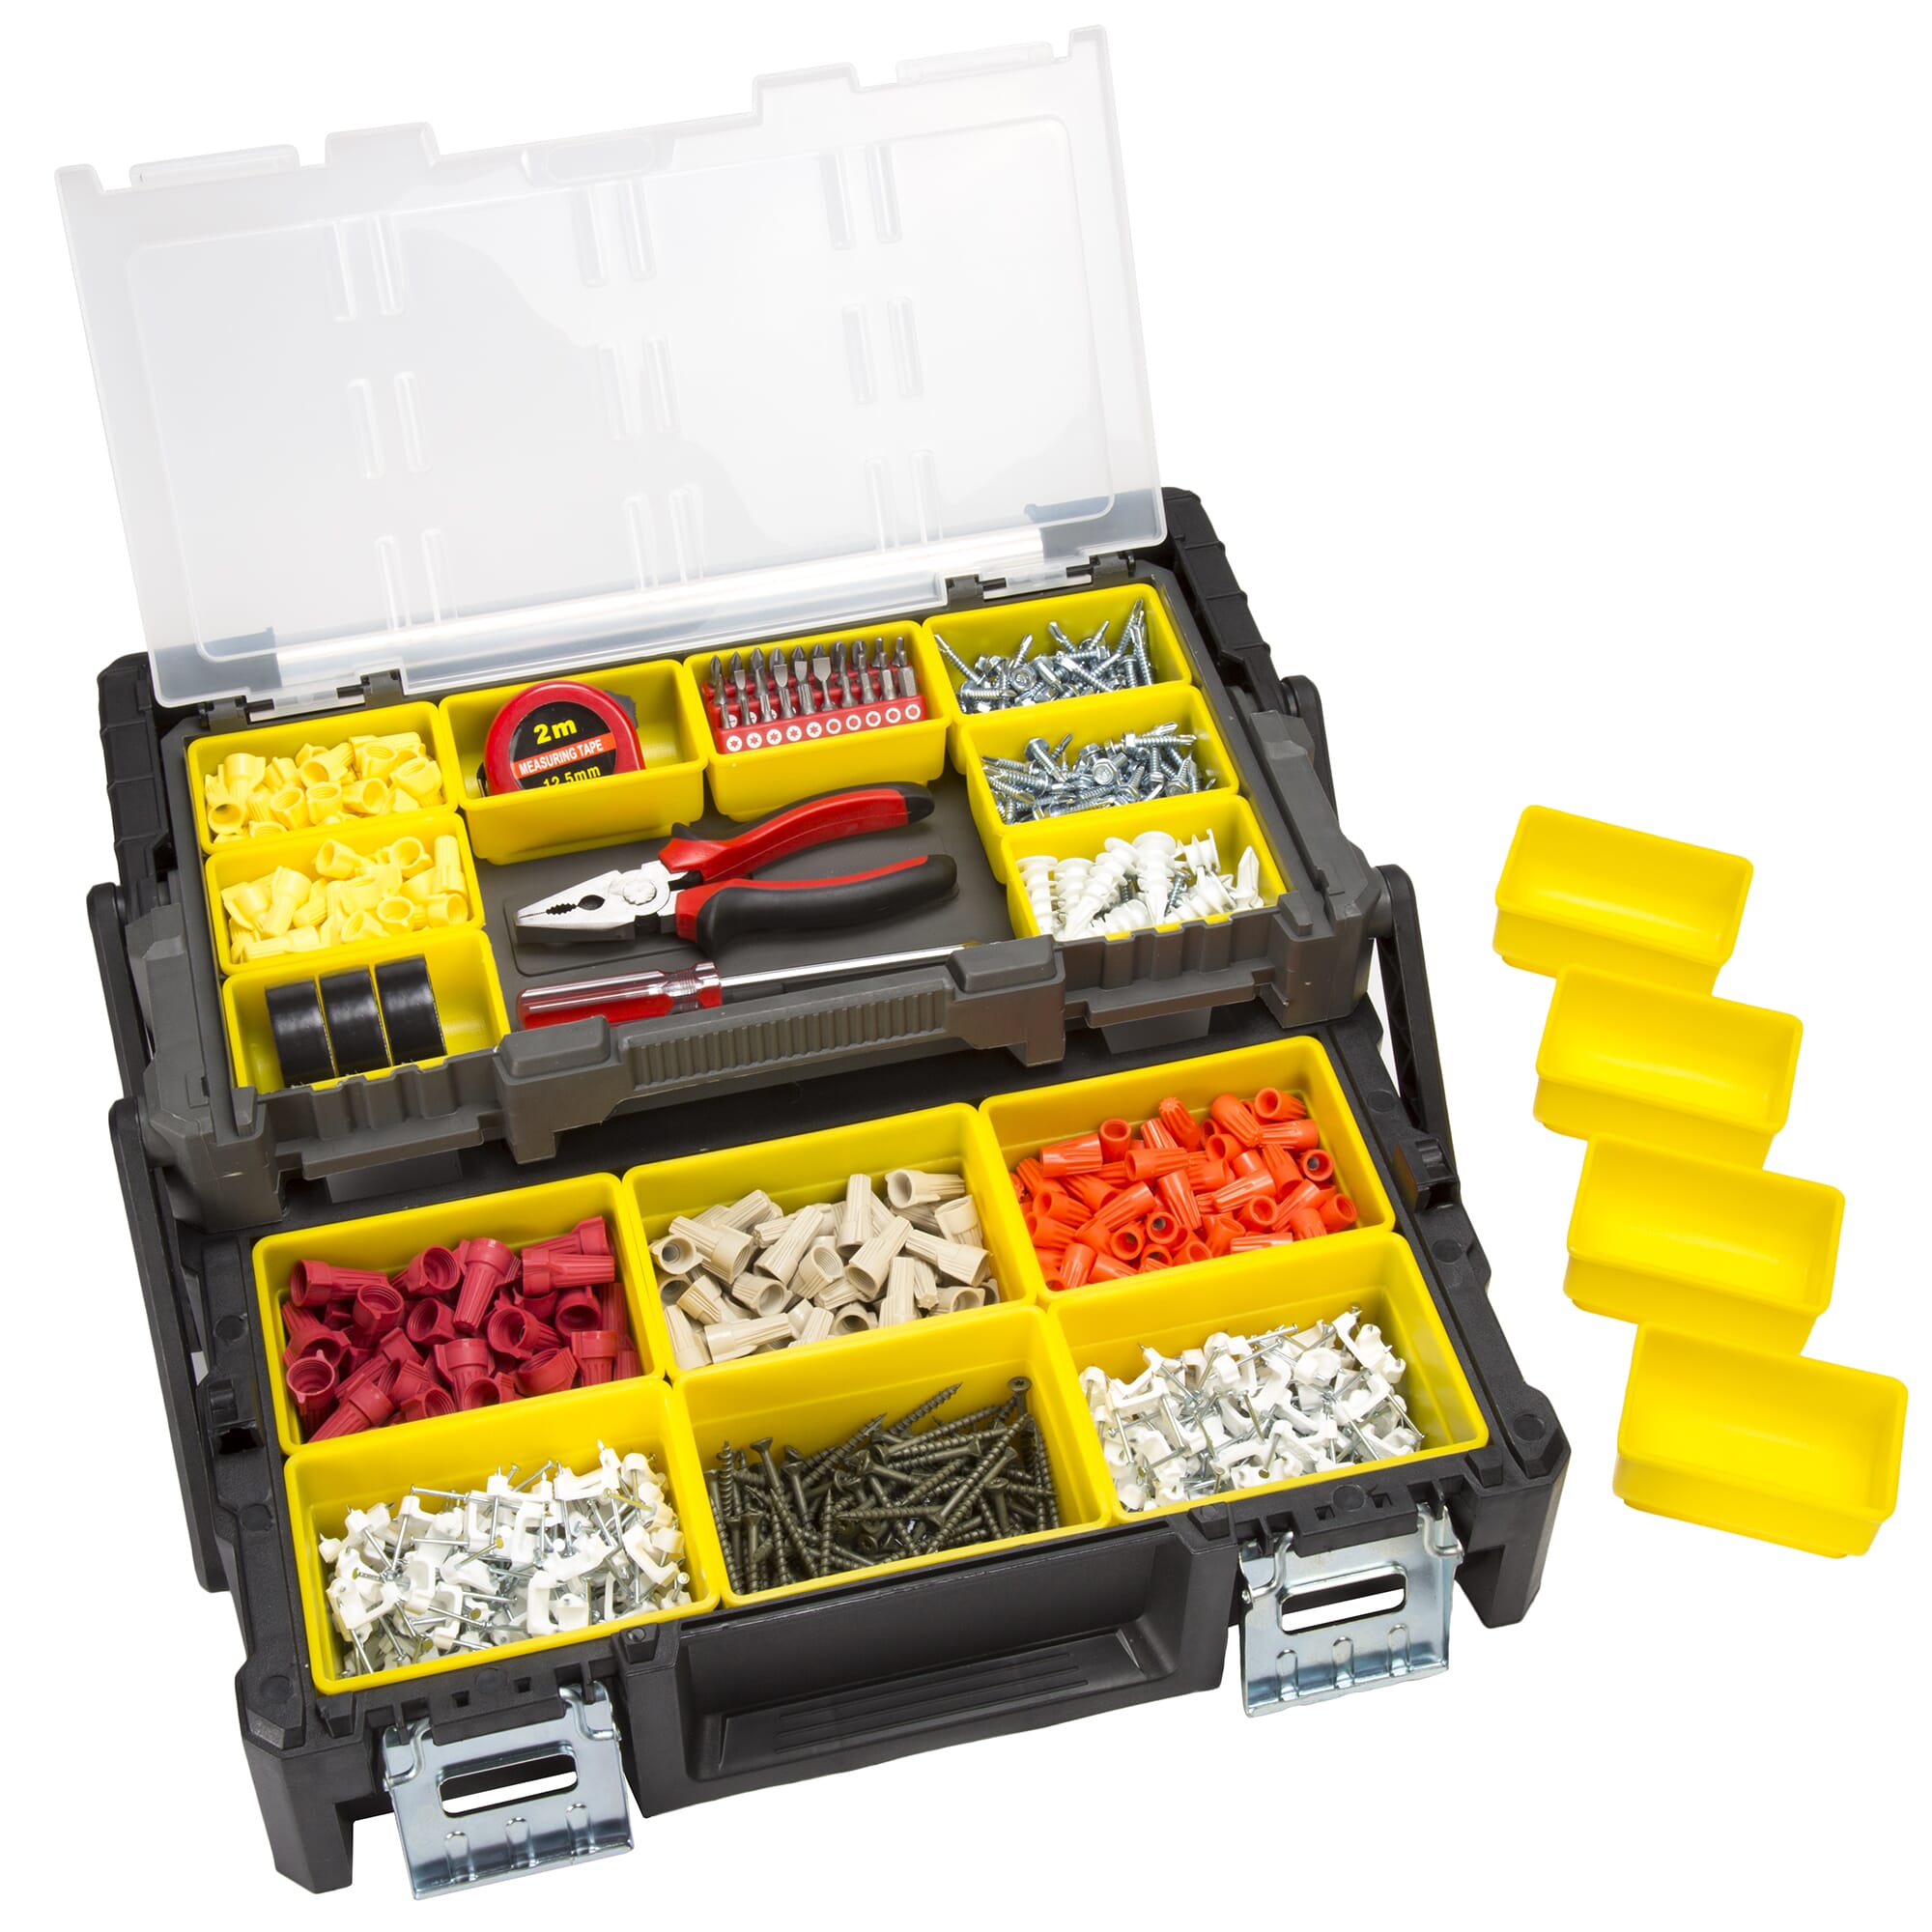 Stalwart Parts & Crafts Tiered Storage Tool Box - 18 Inch - Free Shipping